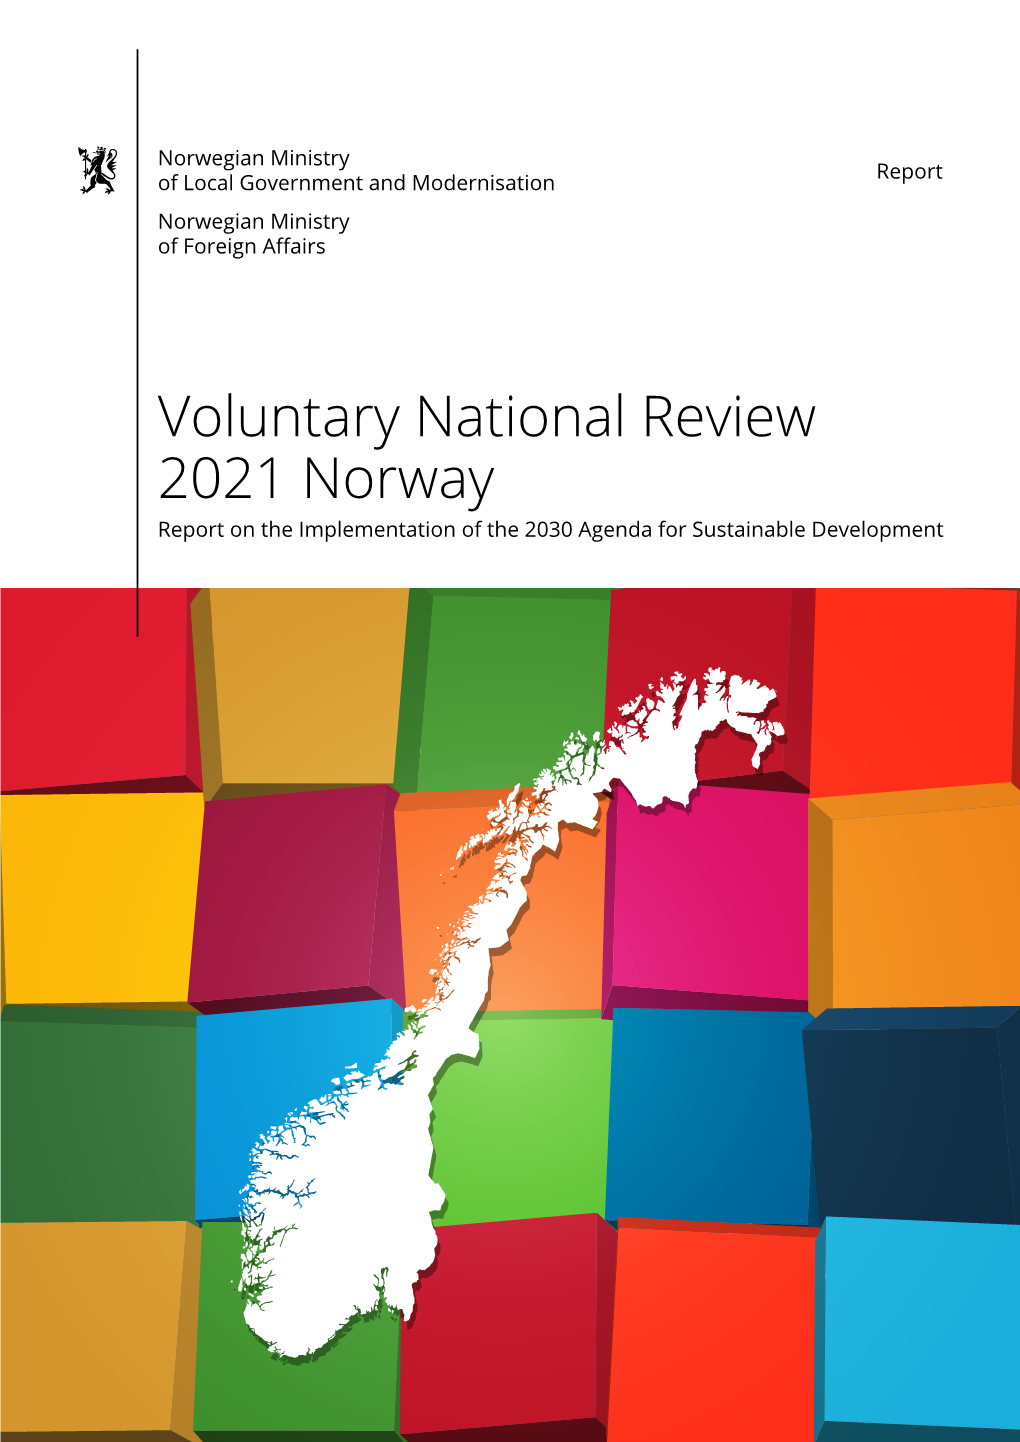 Voluntary National Review 2021 Norway Report on the Implementation of the 2030 Agenda for Sustainable Development Contents